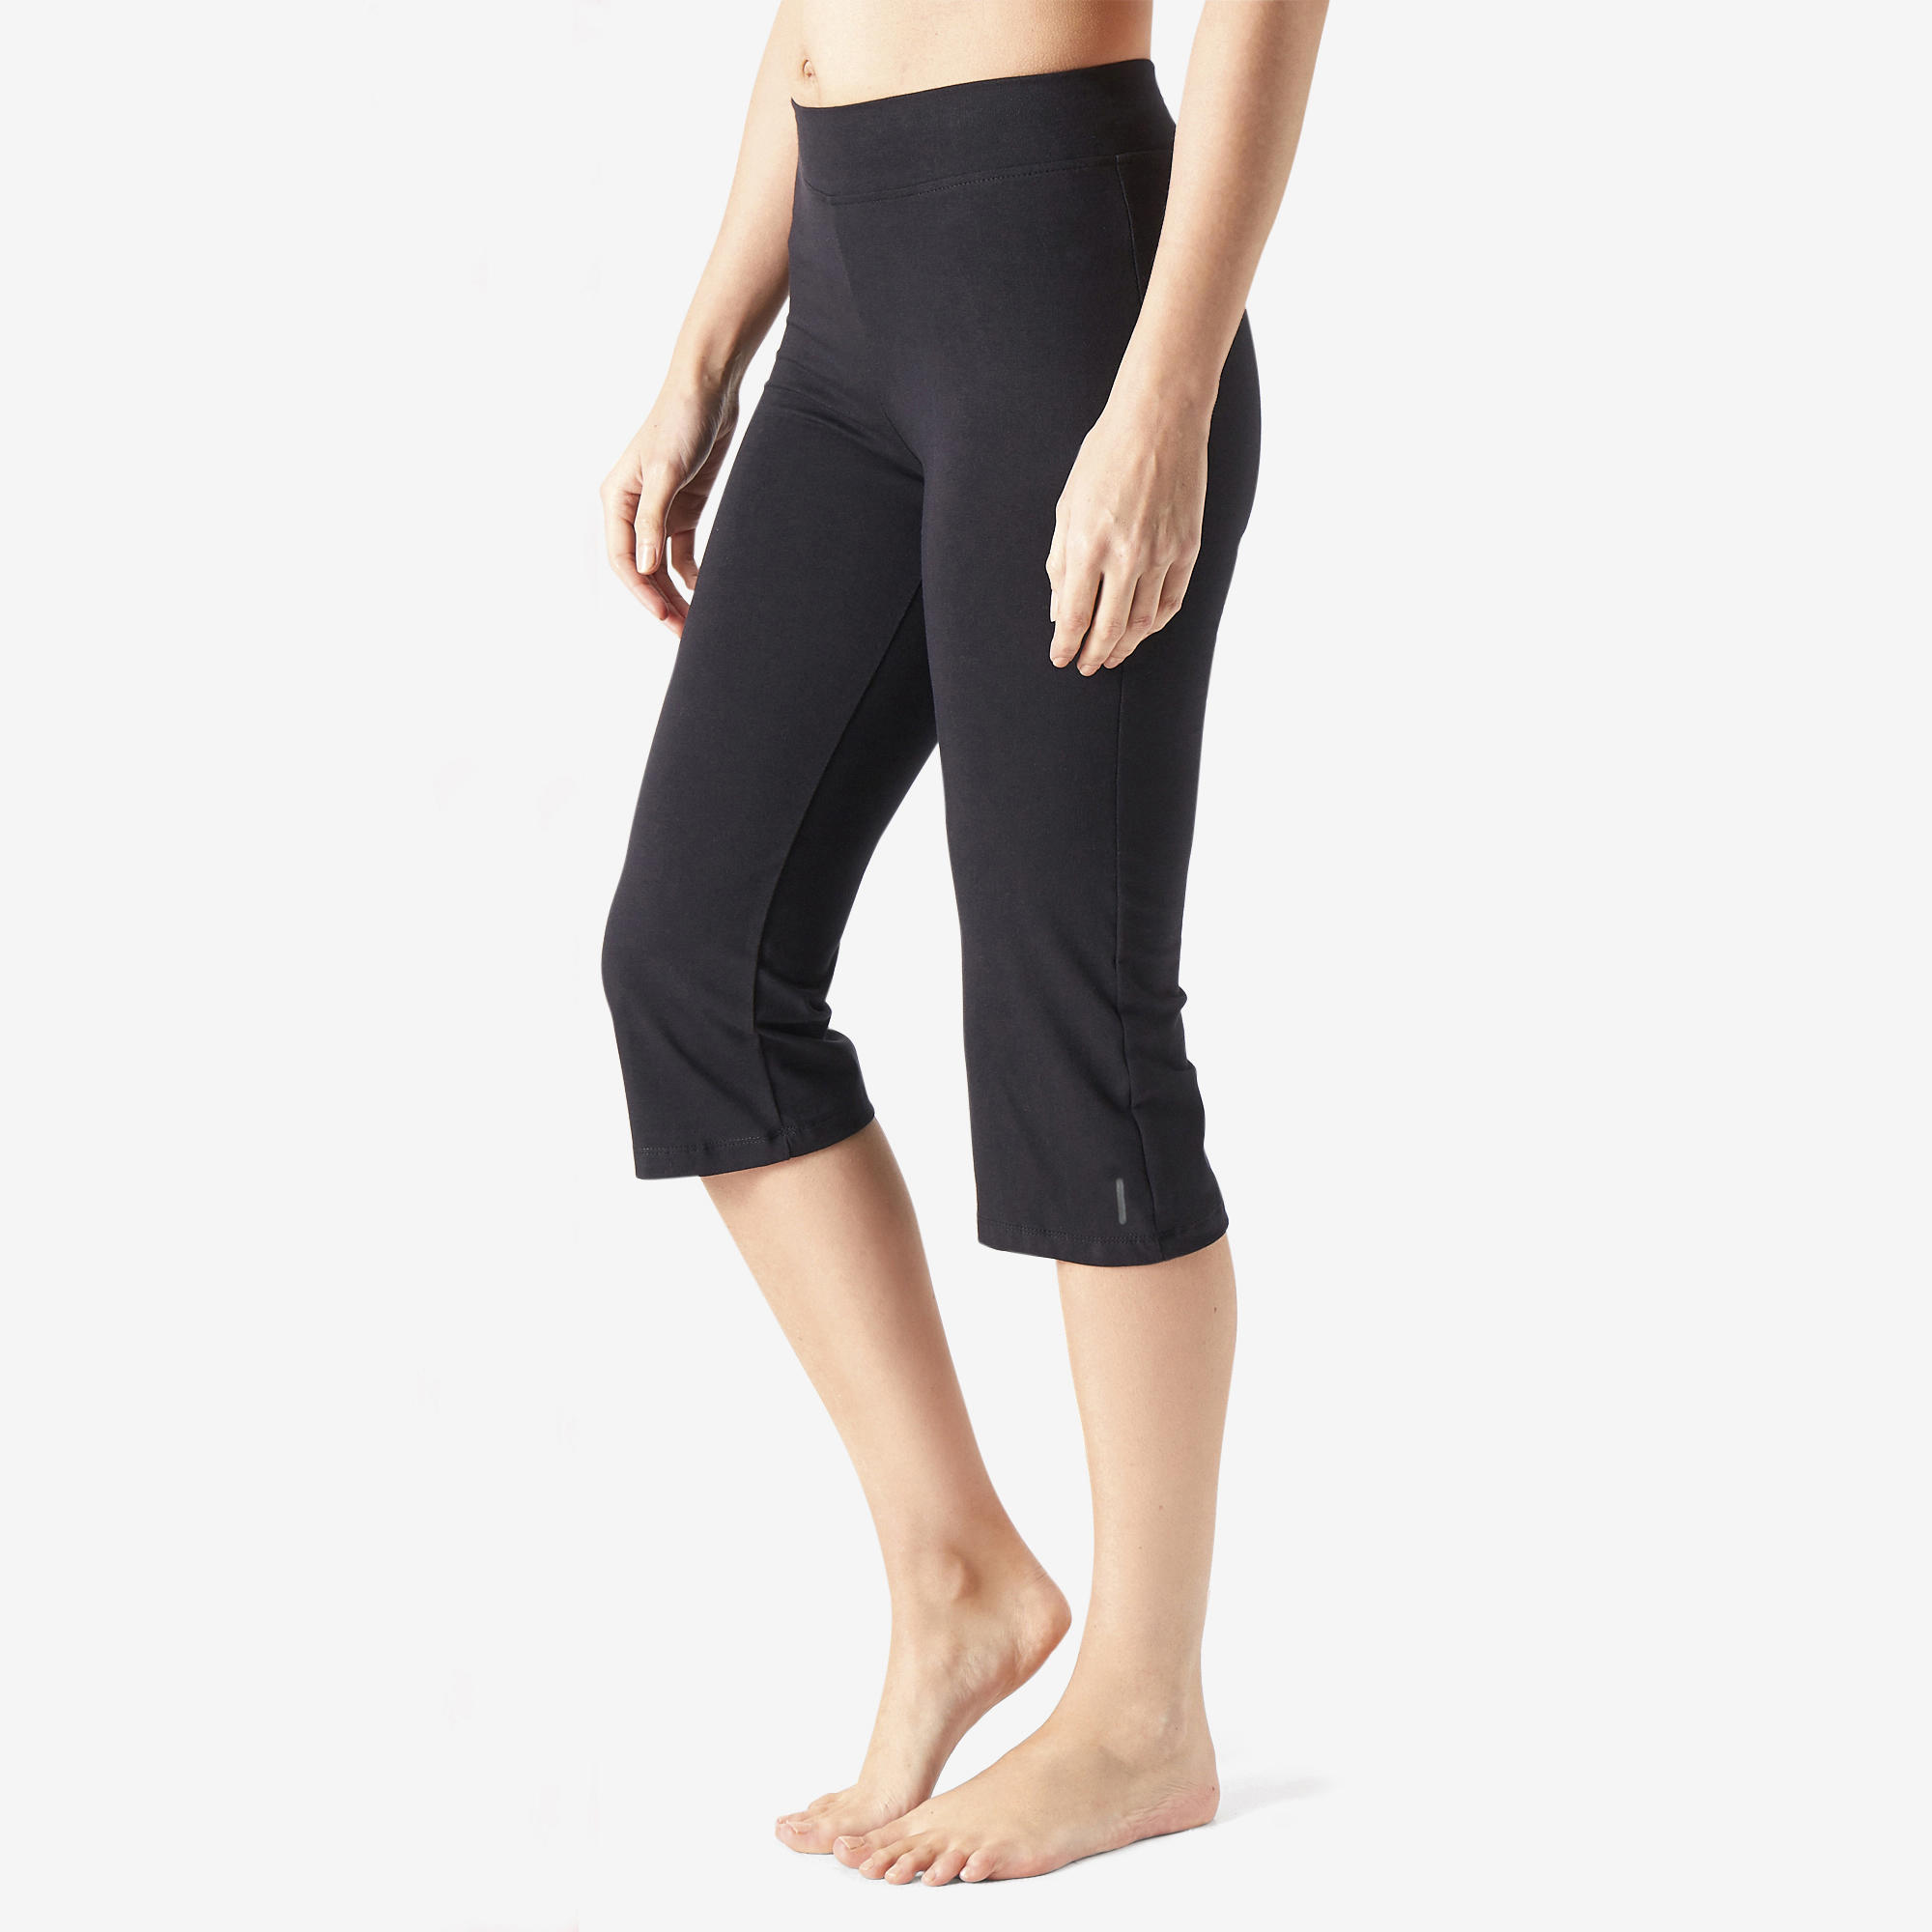 What Are Cropped Gym Leggings | The Sports Edit